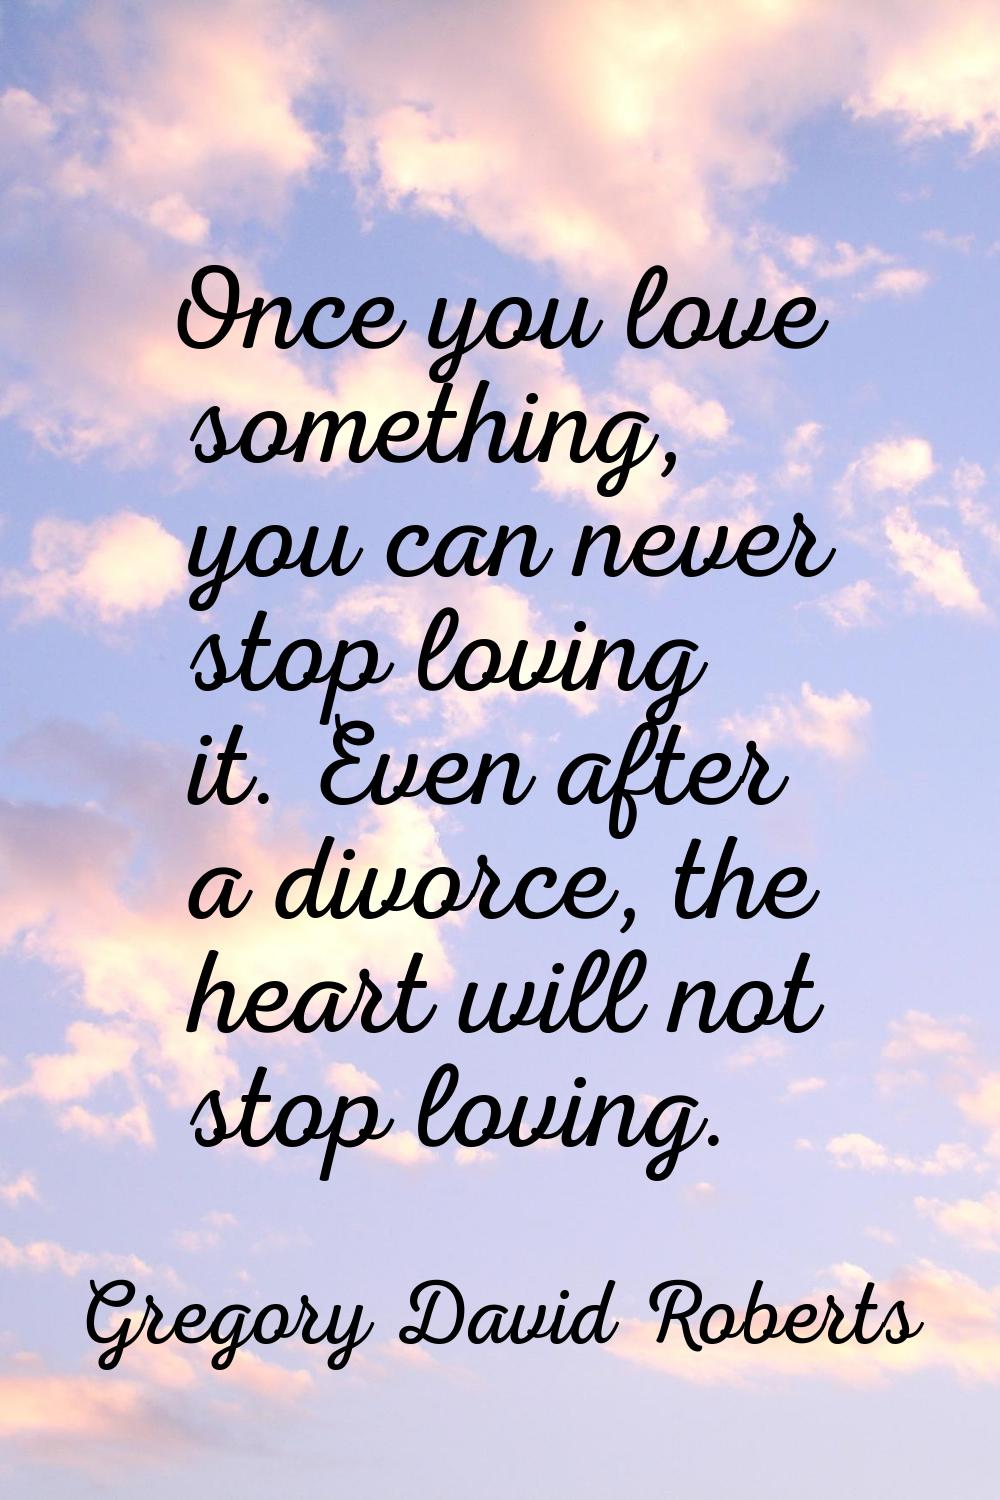 Once you love something, you can never stop loving it. Even after a divorce, the heart will not sto